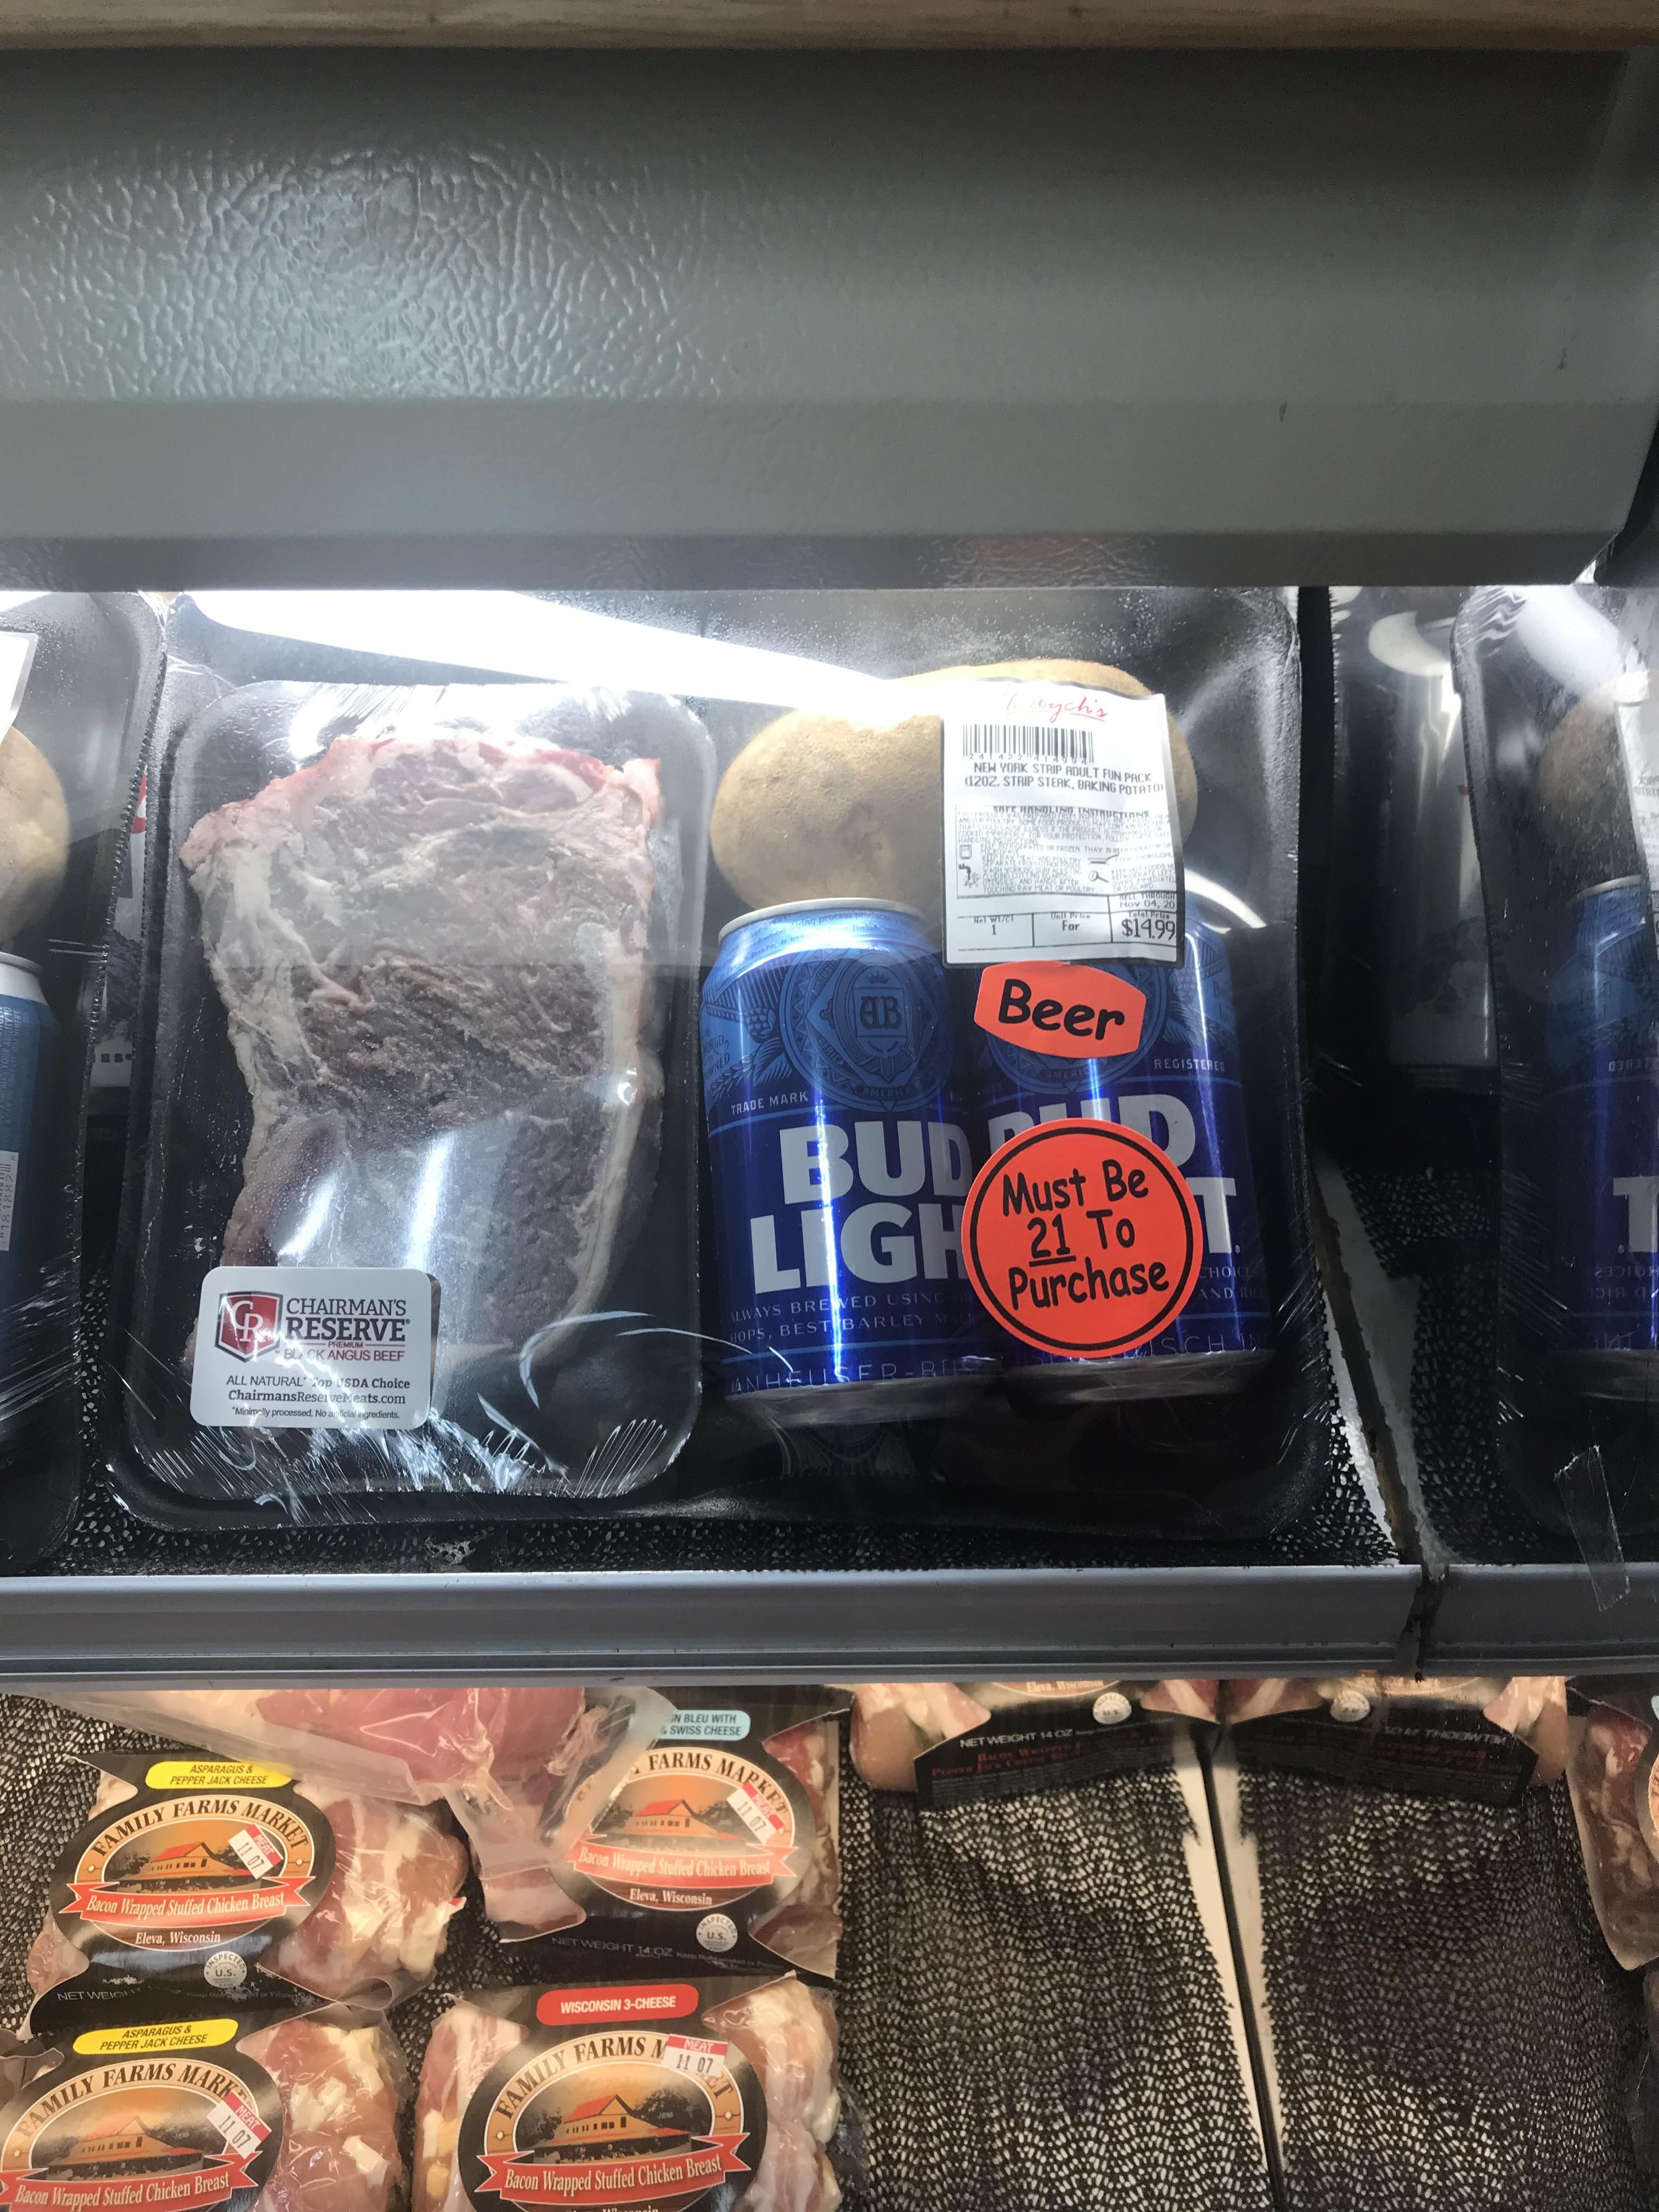 My local grocery store sells a “bachelor special”.